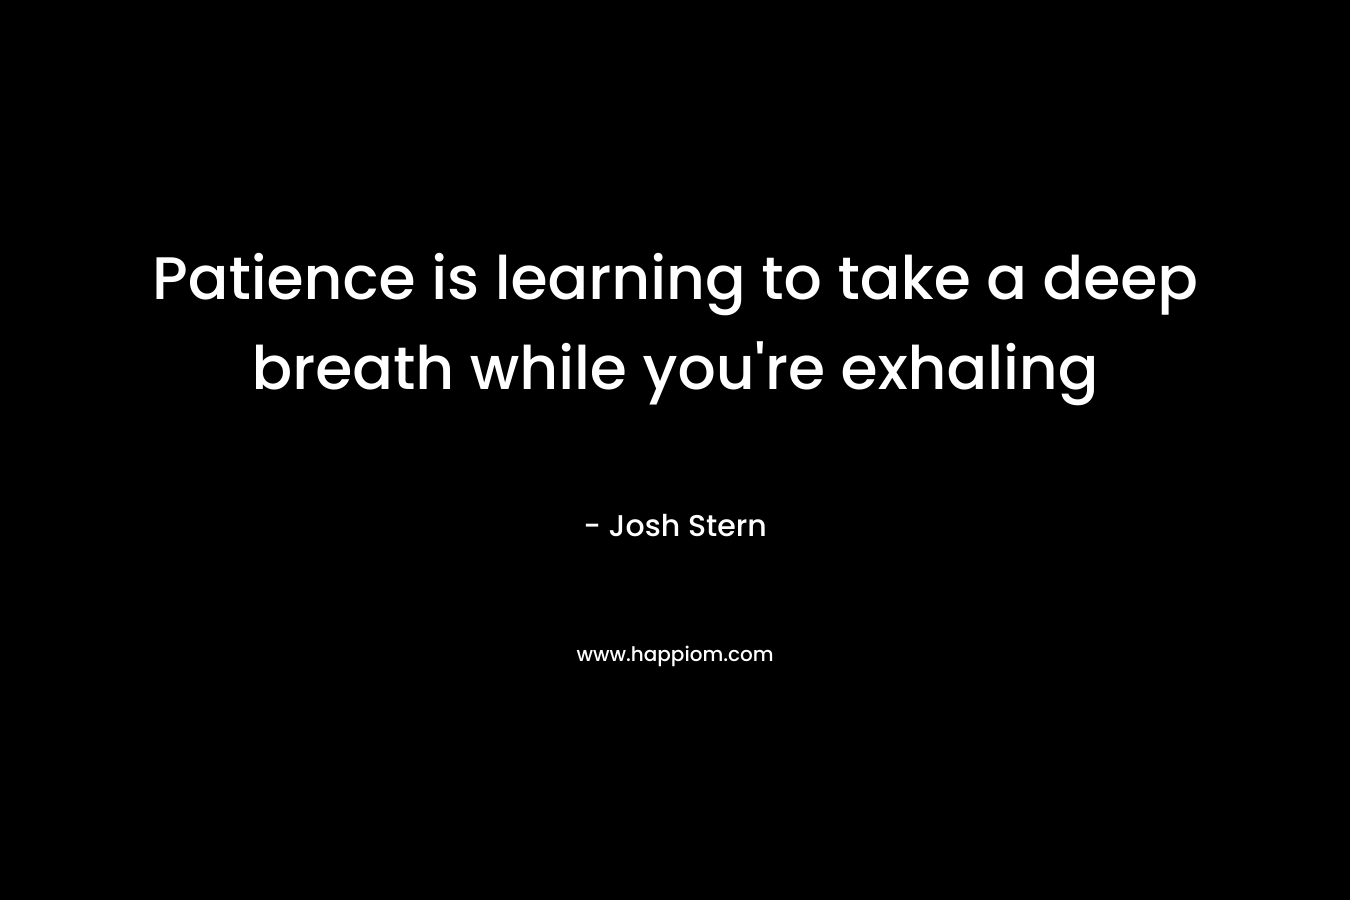 Patience is learning to take a deep breath while you're exhaling